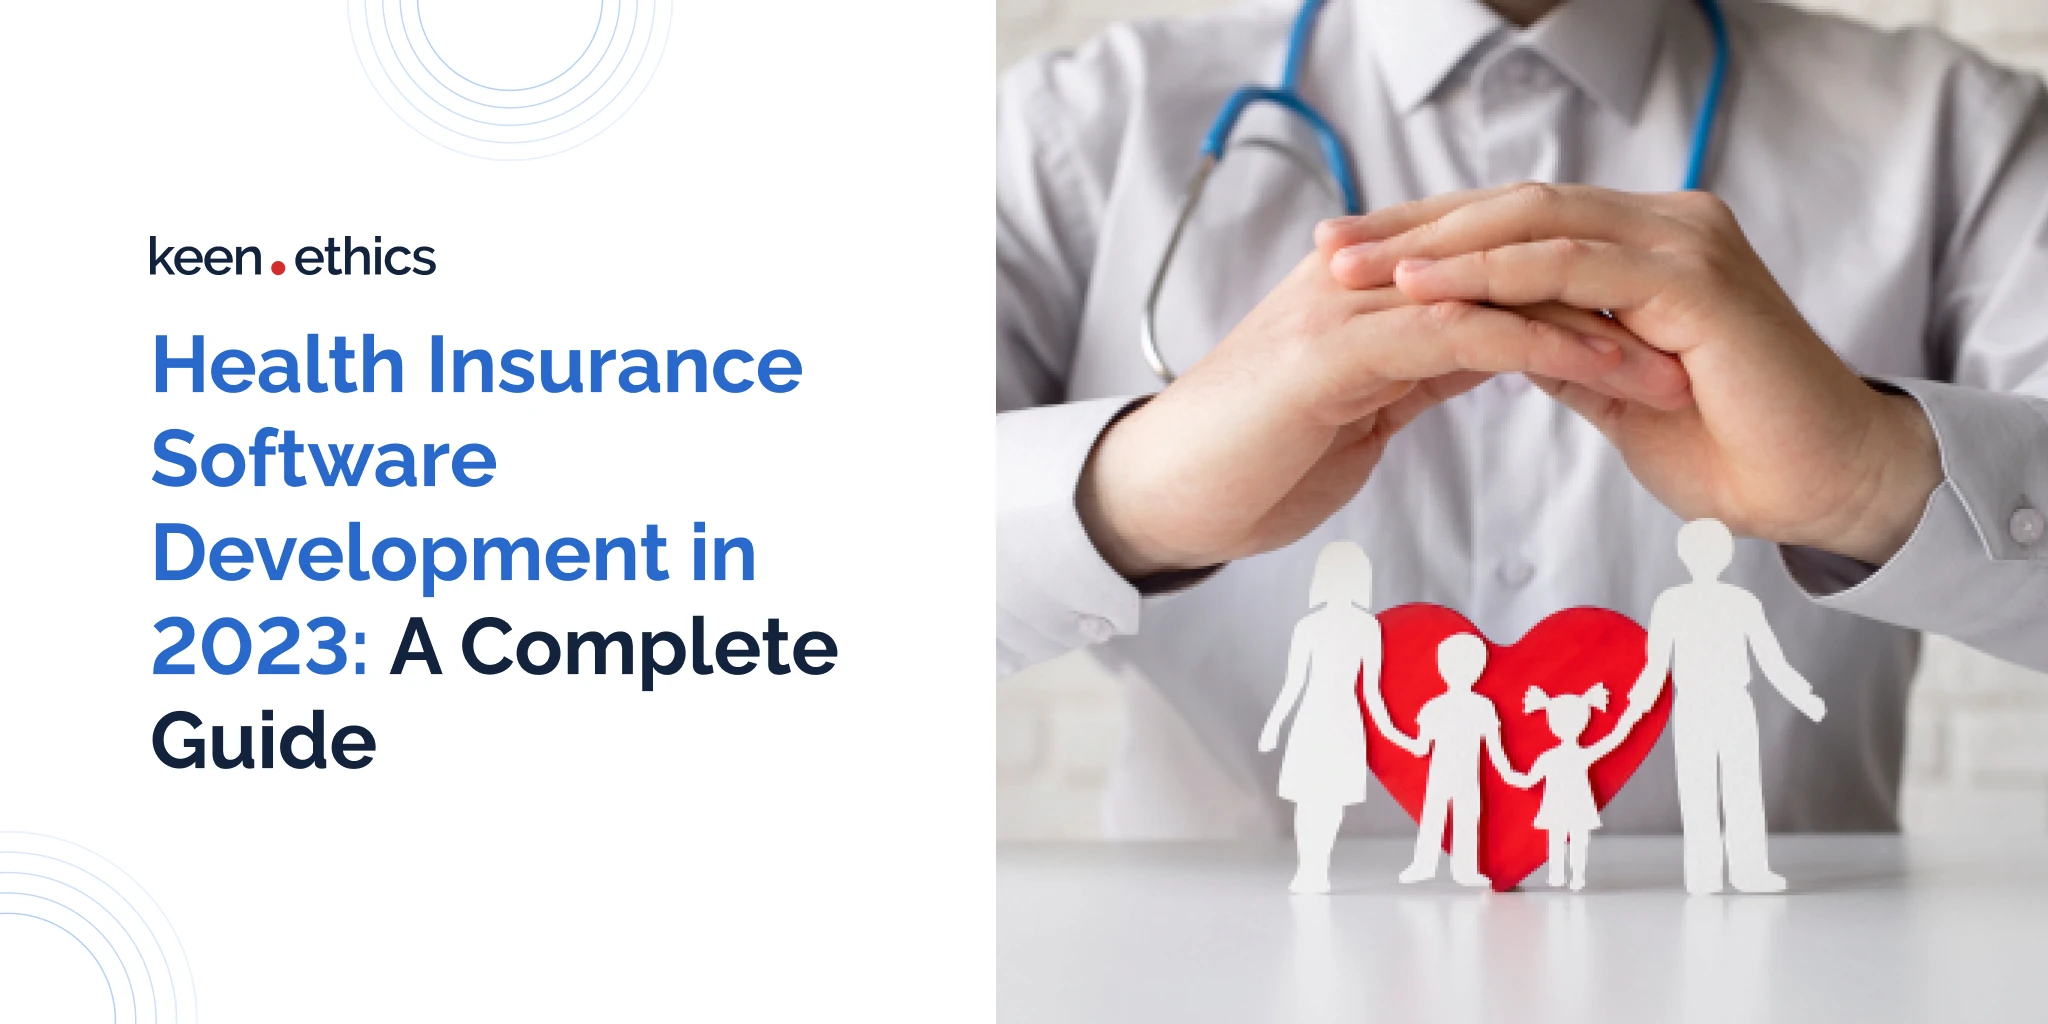 Health Insurance Software Development in 2023: A Complete Guide